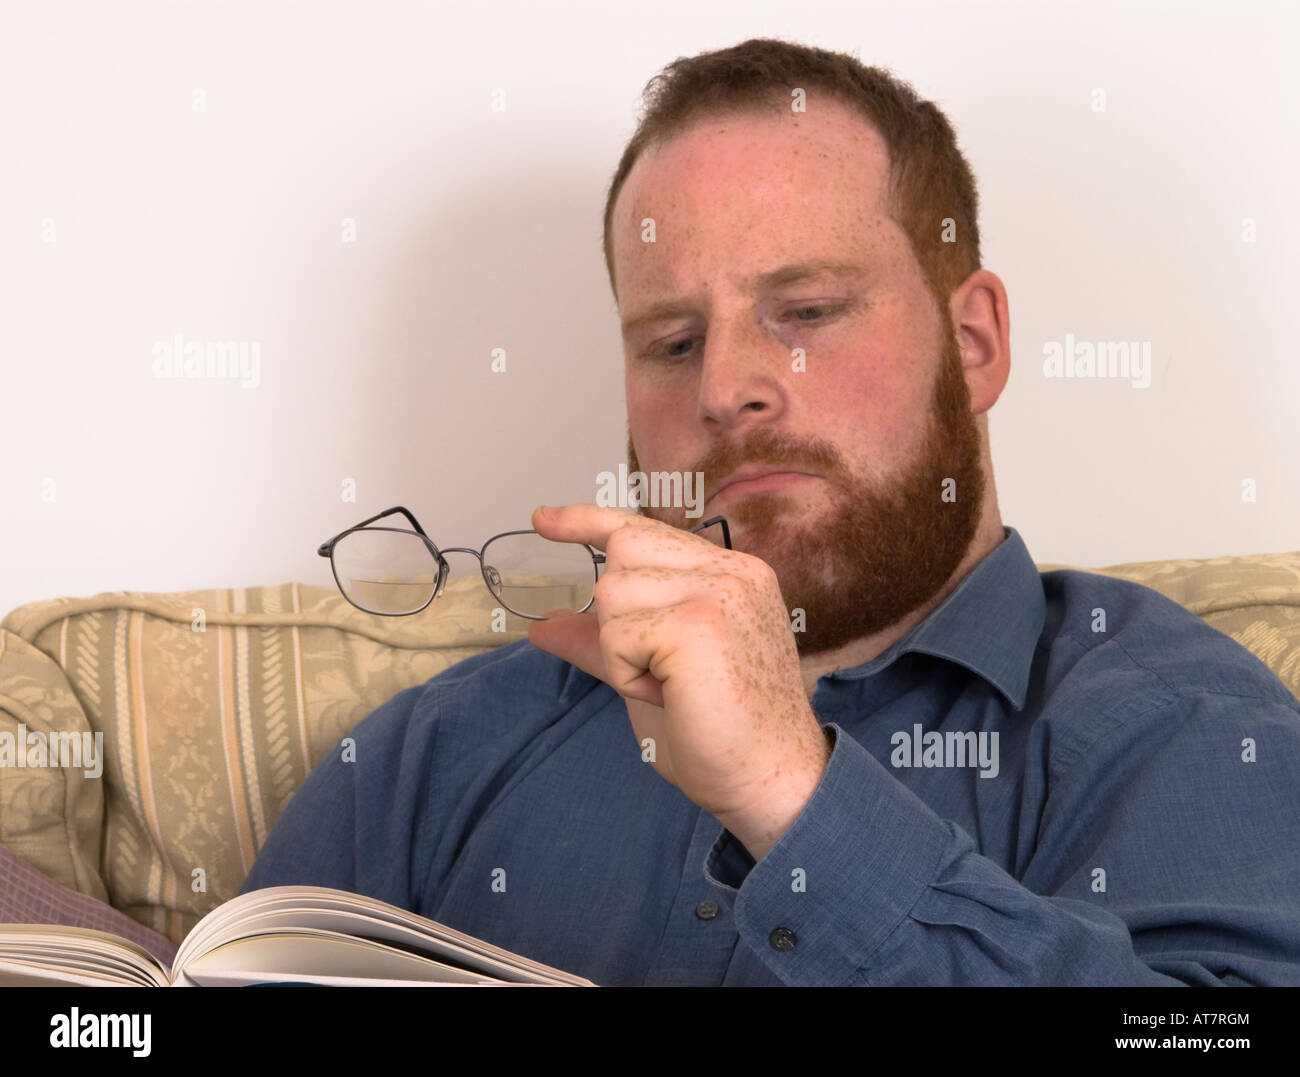 young man with poor eyesight wearing glasses straining eyes to read book Stock Photo